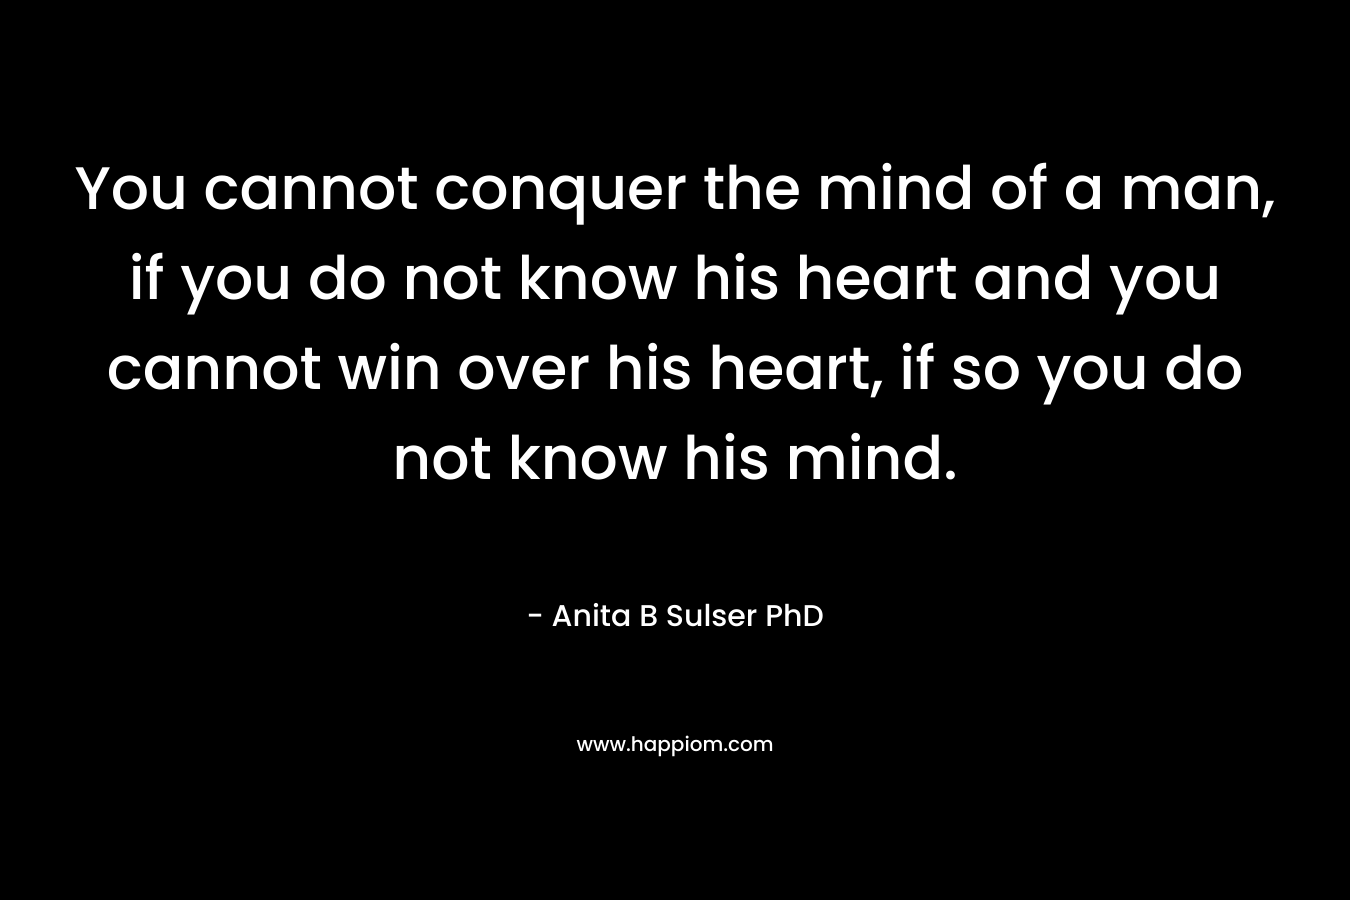 You cannot conquer the mind of a man, if you do not know his heart and you cannot win over his heart, if so you do not know his mind. – Anita B Sulser PhD